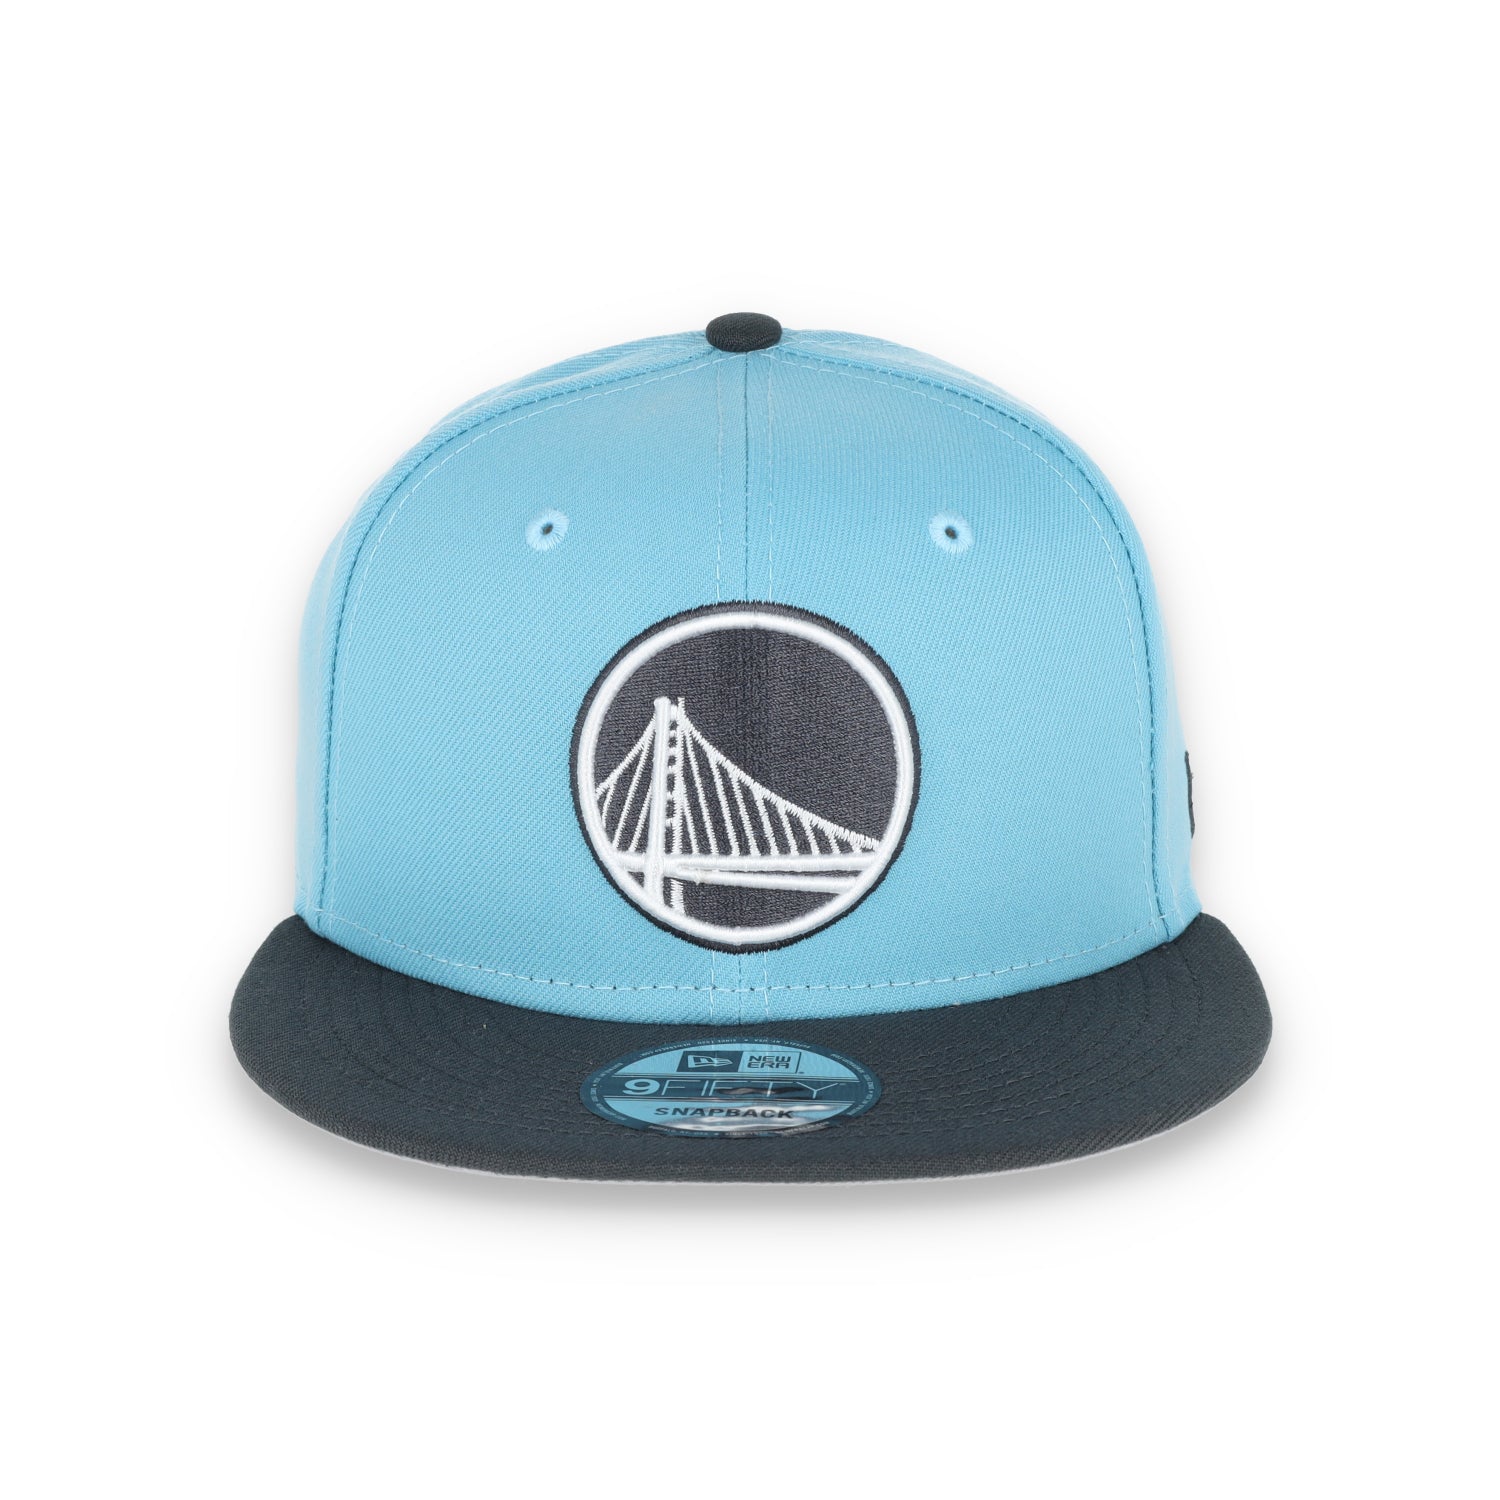 New Era Golden State Warriors Color Pack 2-Tone 9FIFTY Snapback Hat-BABYBLUE/GREY